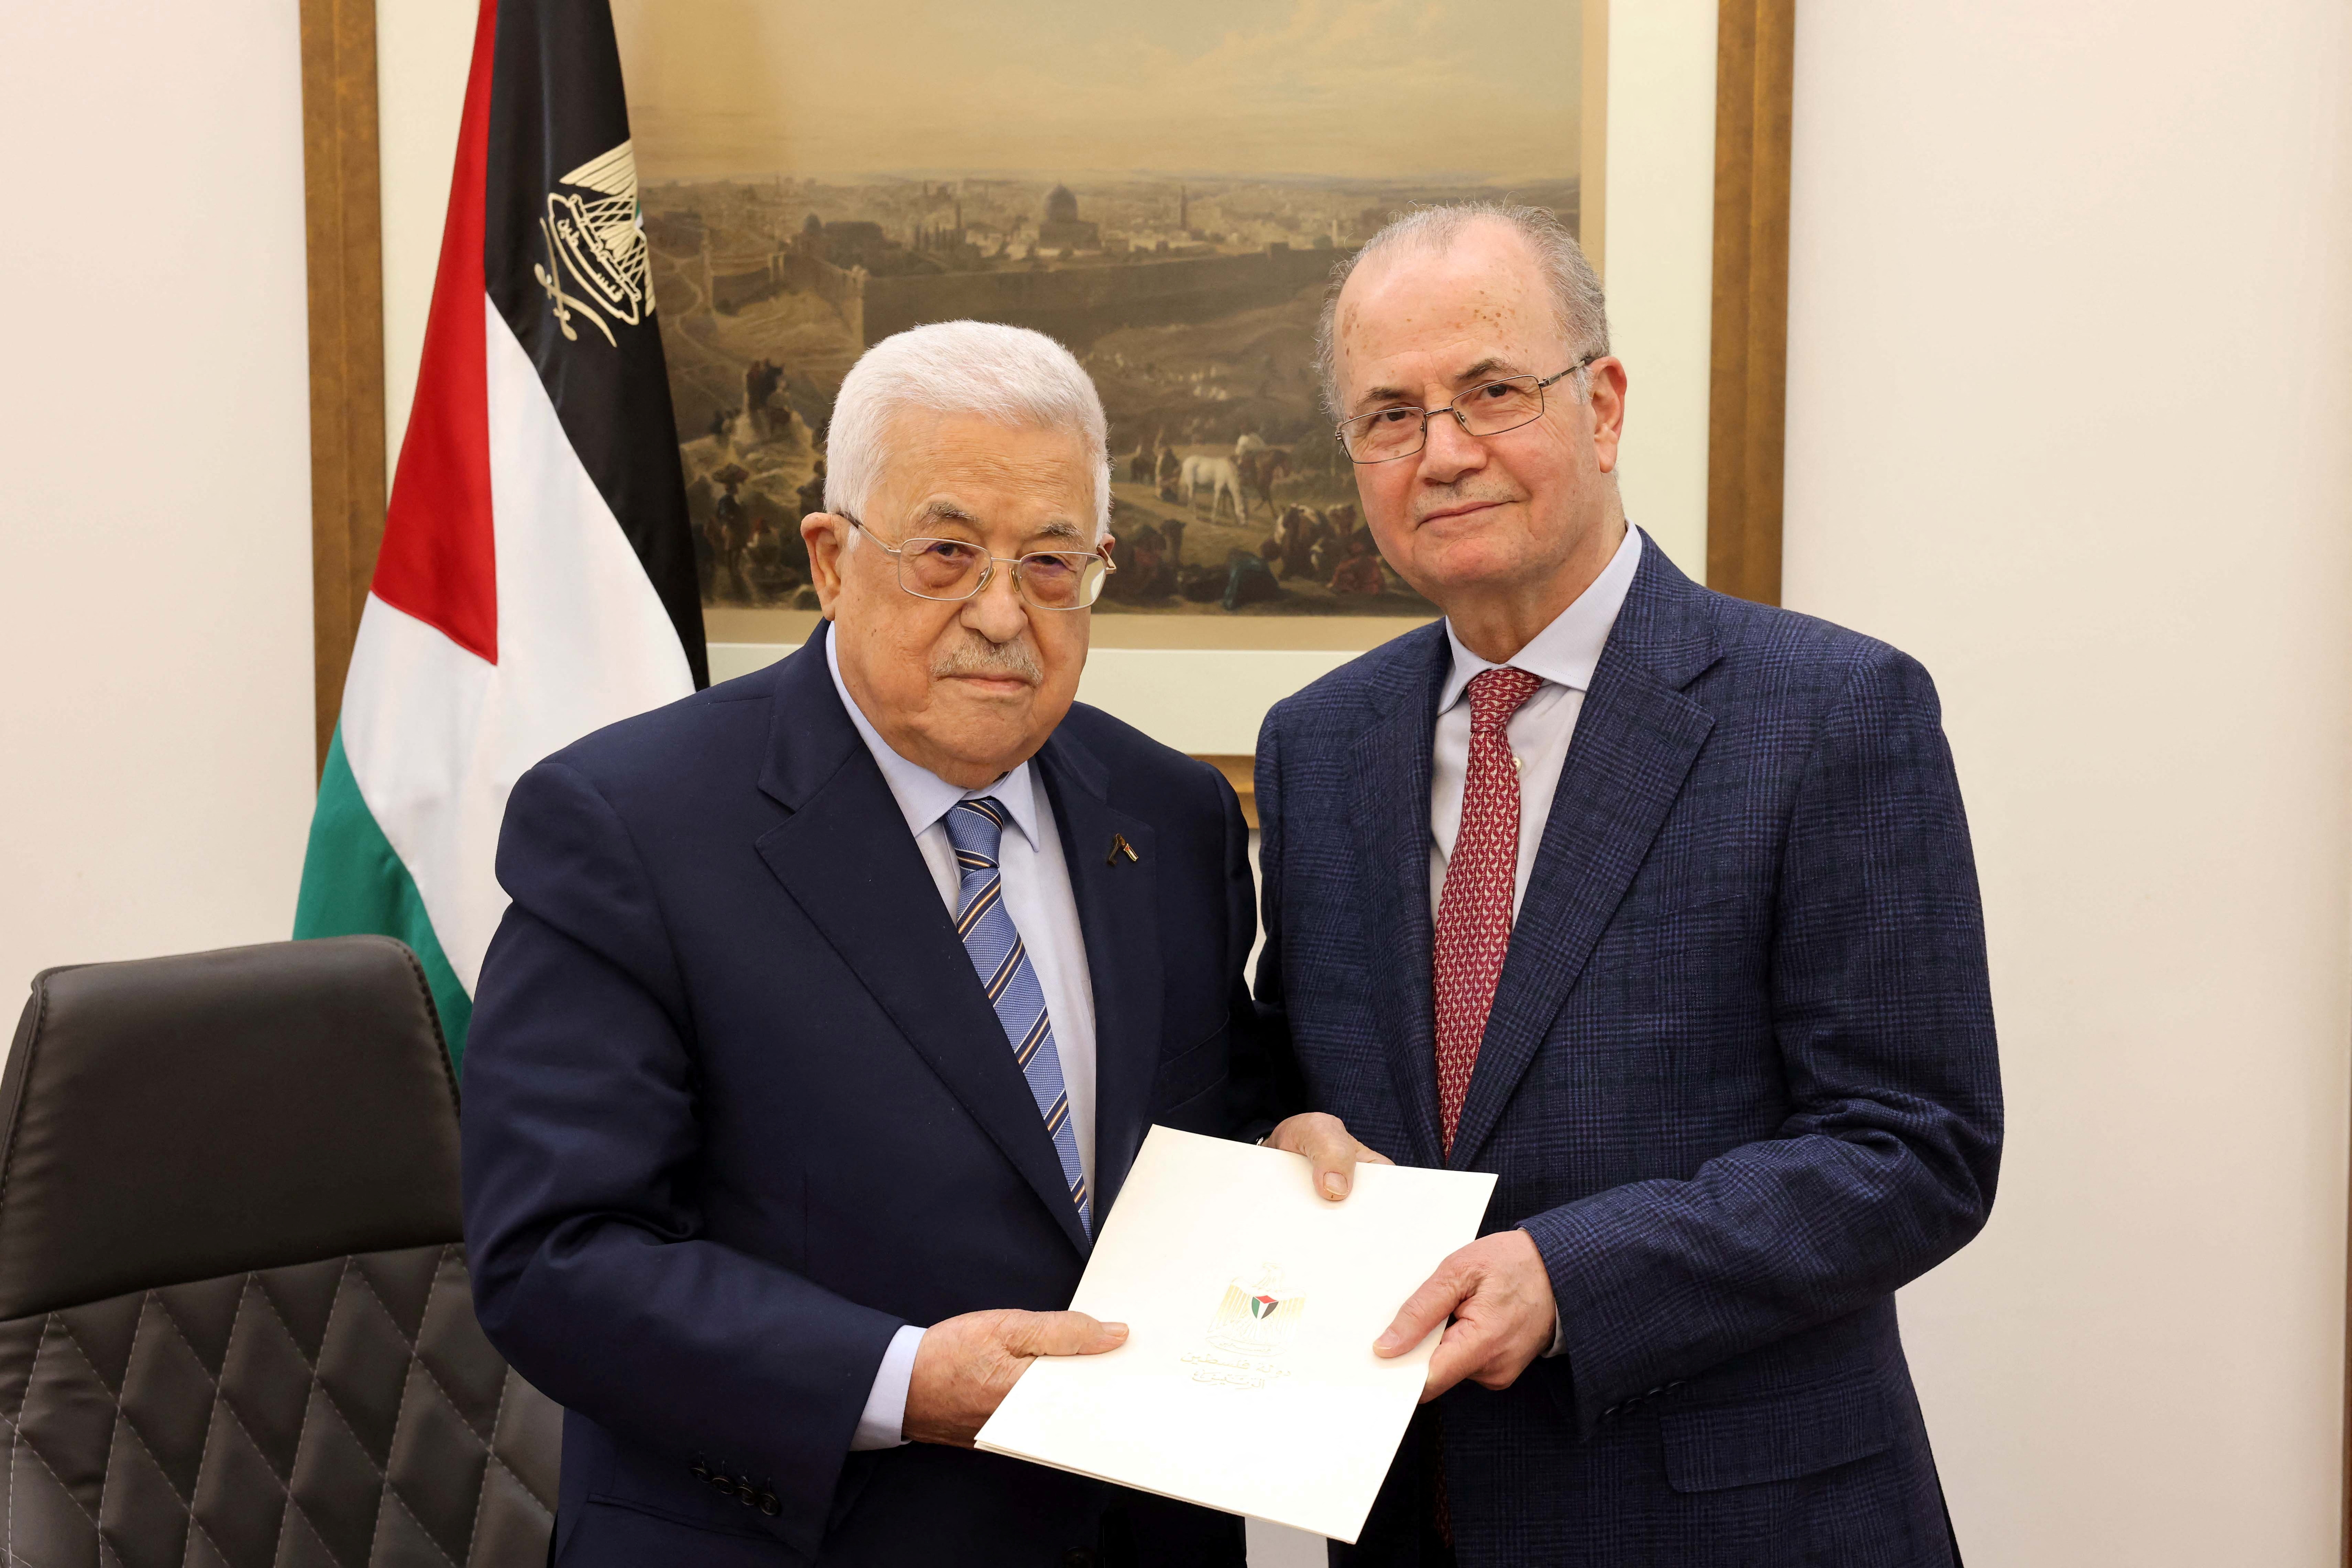 Palestinian President Mahmoud Abbas points Mohammad Mustafa as prime minister of the Palestinian Authority